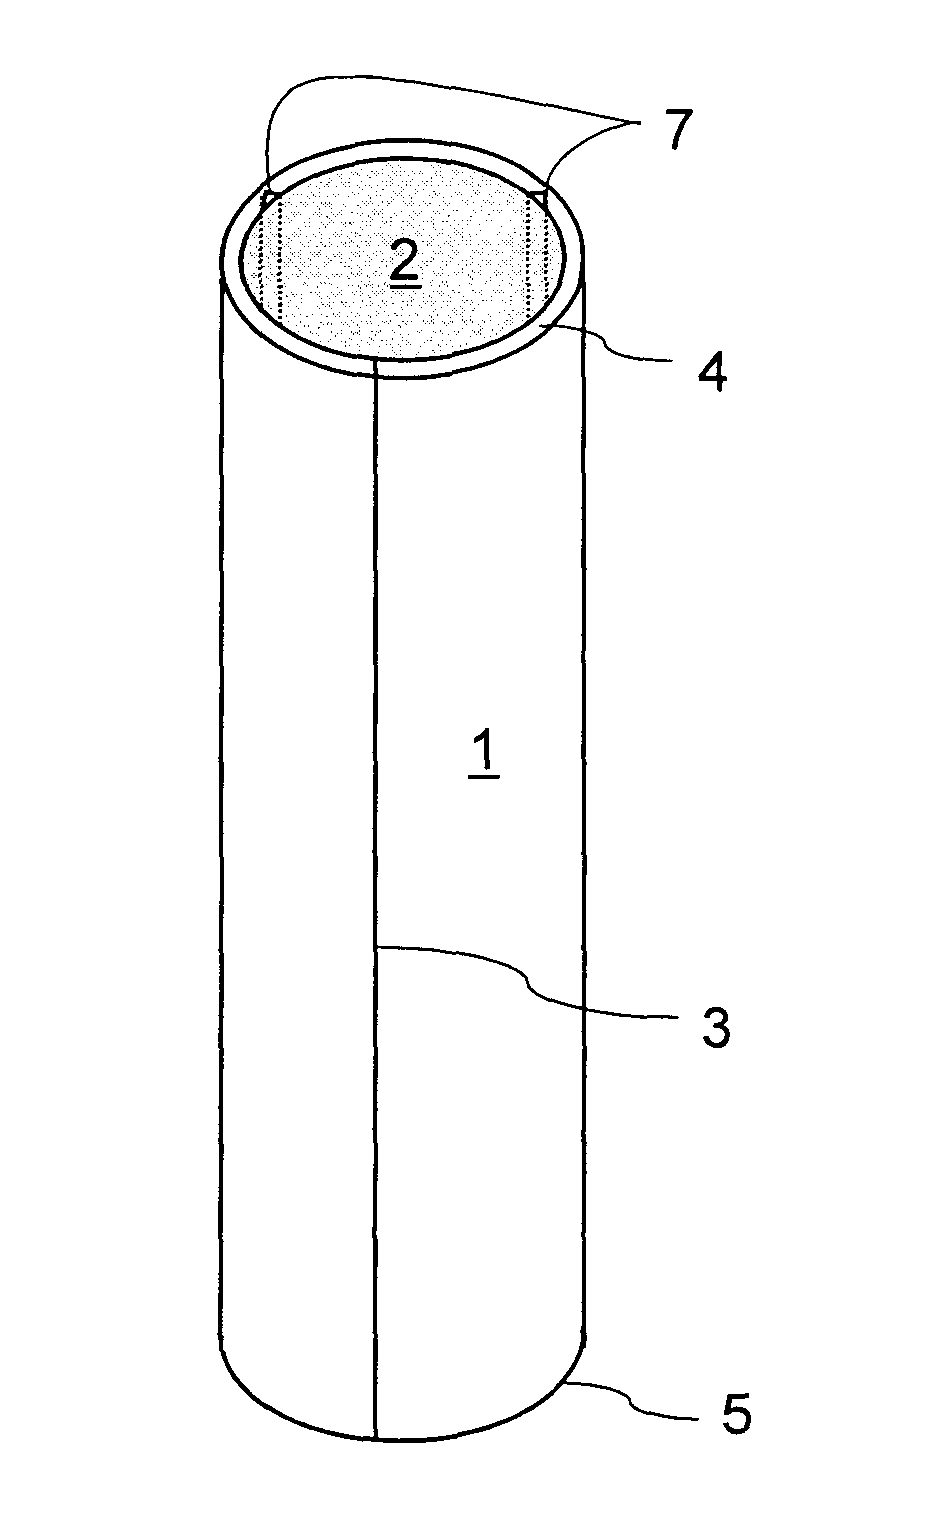 Encasement devices and methods for planting mangroves